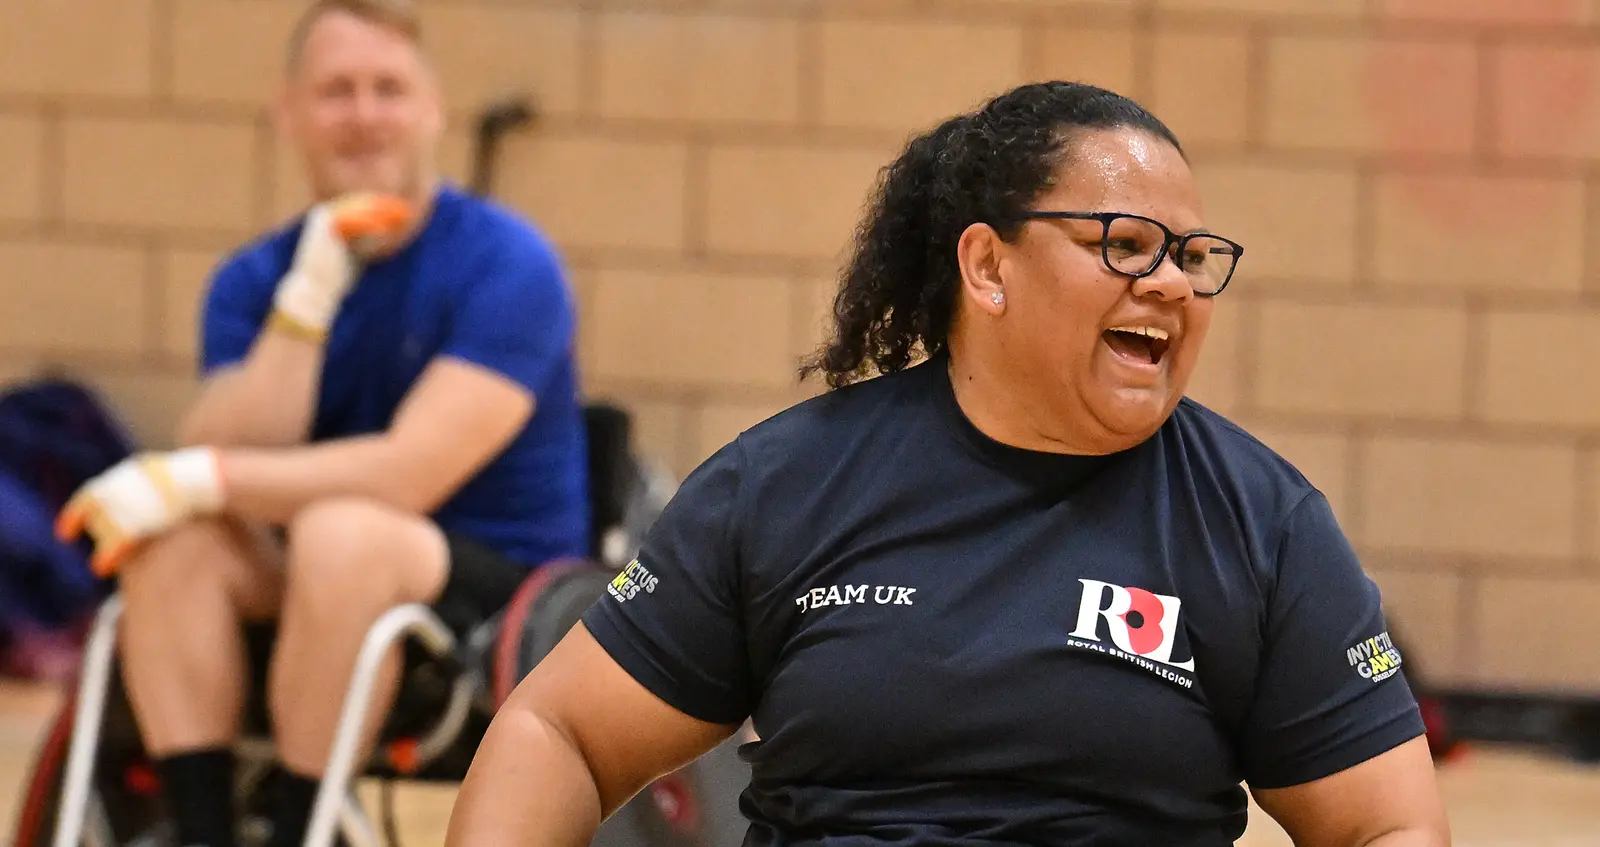 A woman photographed in motion in a wheelchair during a wheelchair basketball game. She is wearing a navy t-shirt that has the RBL logo on one side and Team UK written on the other side, and black shorts and white trainers.